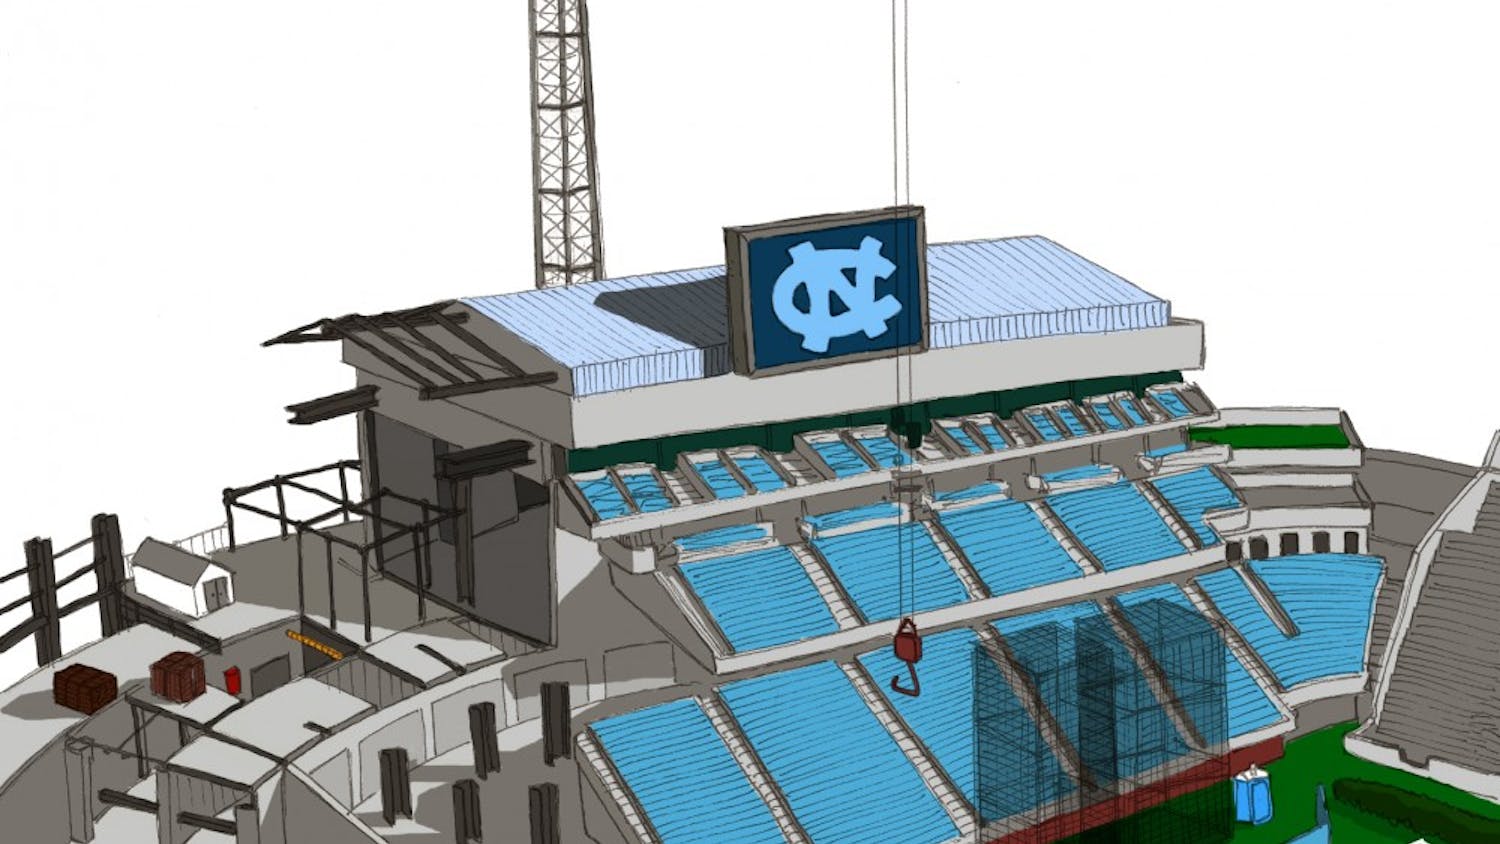 	The Rams Club, UNC’s athletic booster club, plans for Kenan Stadium’s east end zone to be completed in time for North Carolina’s first home football game in the 2011 season. Officials said the club has exceeded its expectations for donations, which will pay for $35 million out of the $70 million total for the project. 